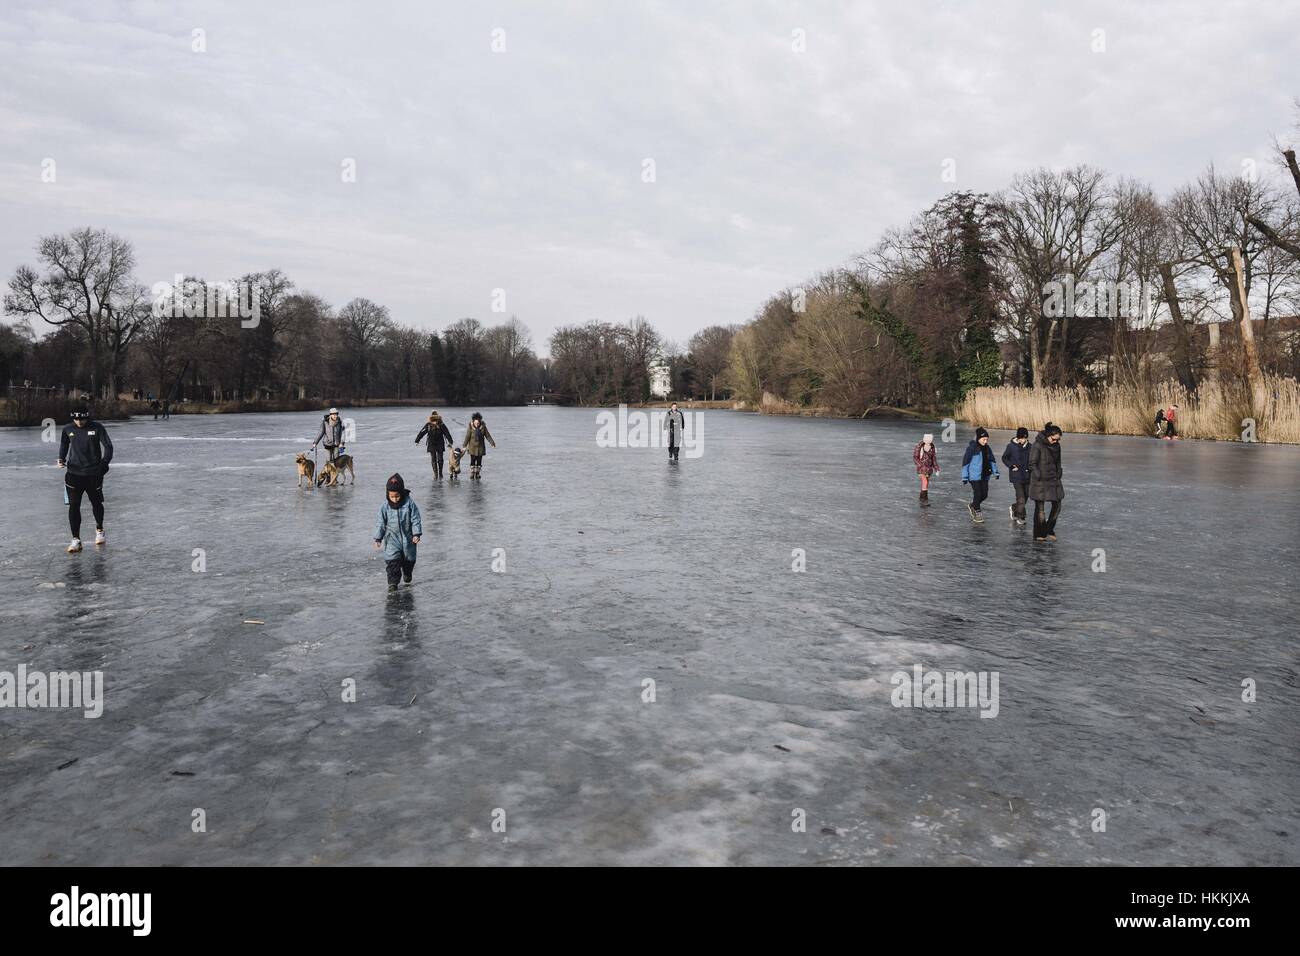 Berlin, Berlin, Germany. 29th Jan, 2017. A Policeman disperse people from a frozen lake next to Charlottenburg Palace. Due to the cold temperatures in January, a thin layer of ice has formed on the Berlin waters. Berlin Police say the ice on many lakes and rivers in the area is not safe to be on. Credit: Jan Scheunert/ZUMA Wire/Alamy Live News Stock Photo